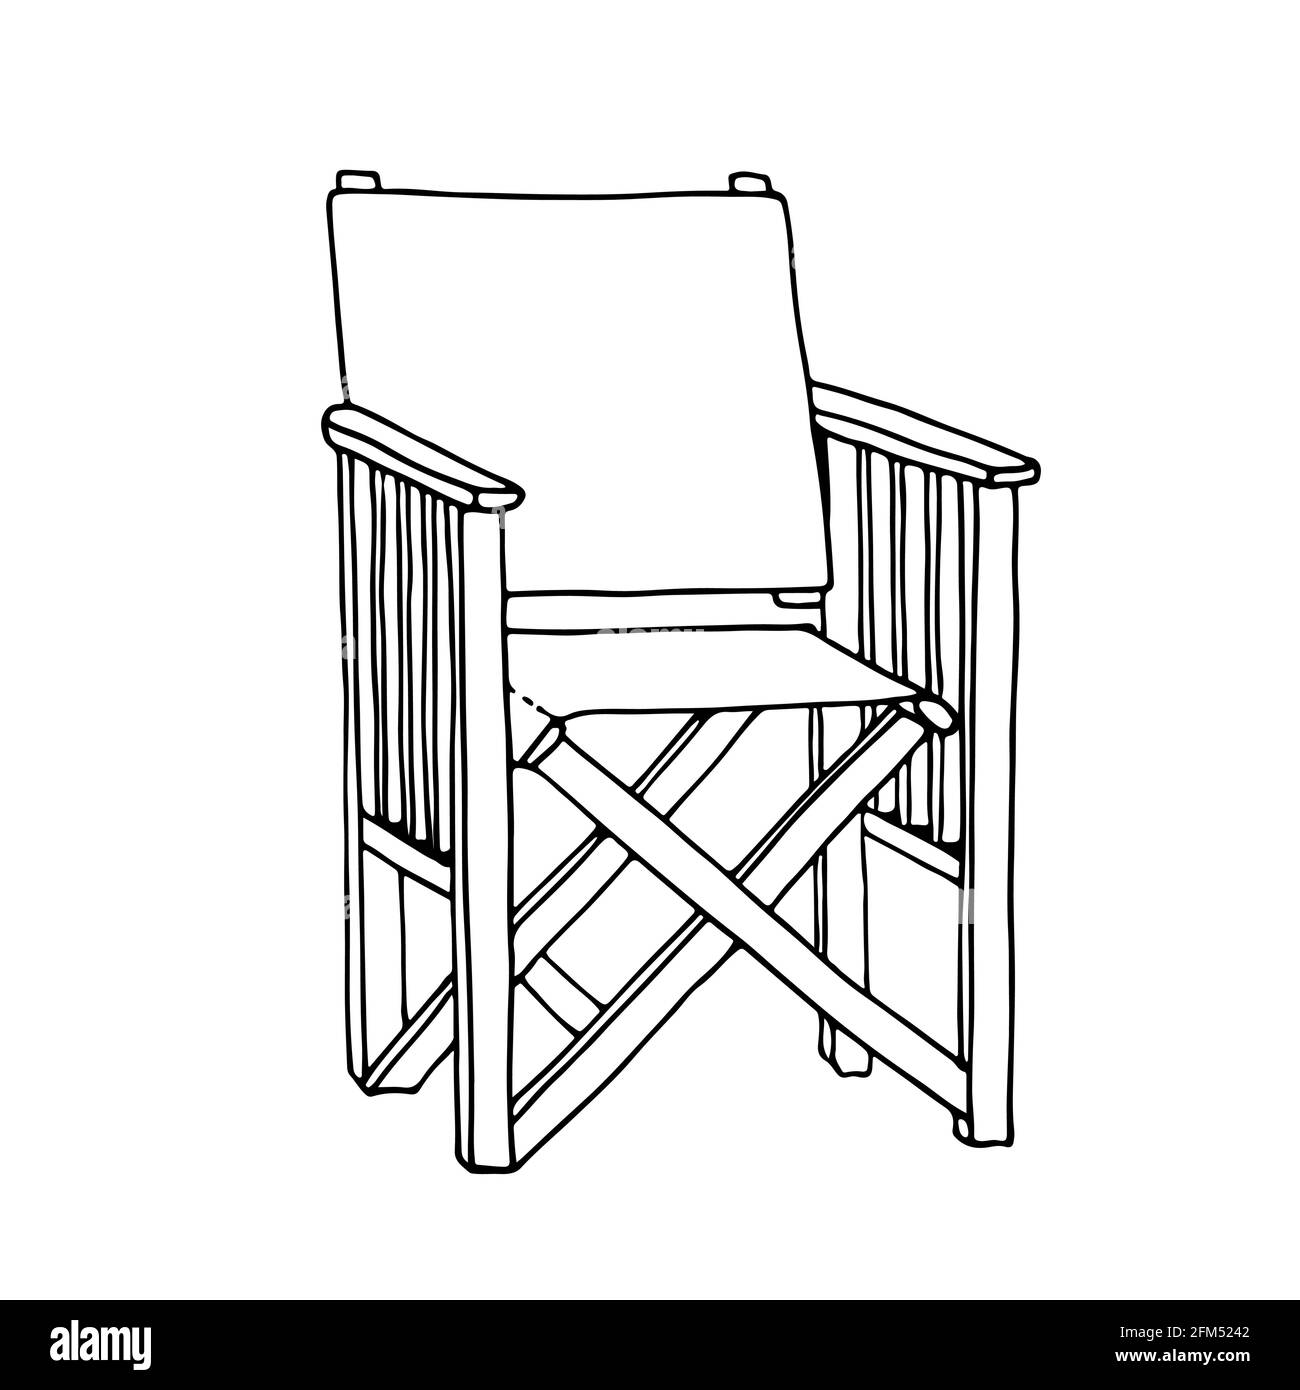 Drawing Chair Stock Illustrations  32859 Drawing Chair Stock  Illustrations Vectors  Clipart  Dreamstime